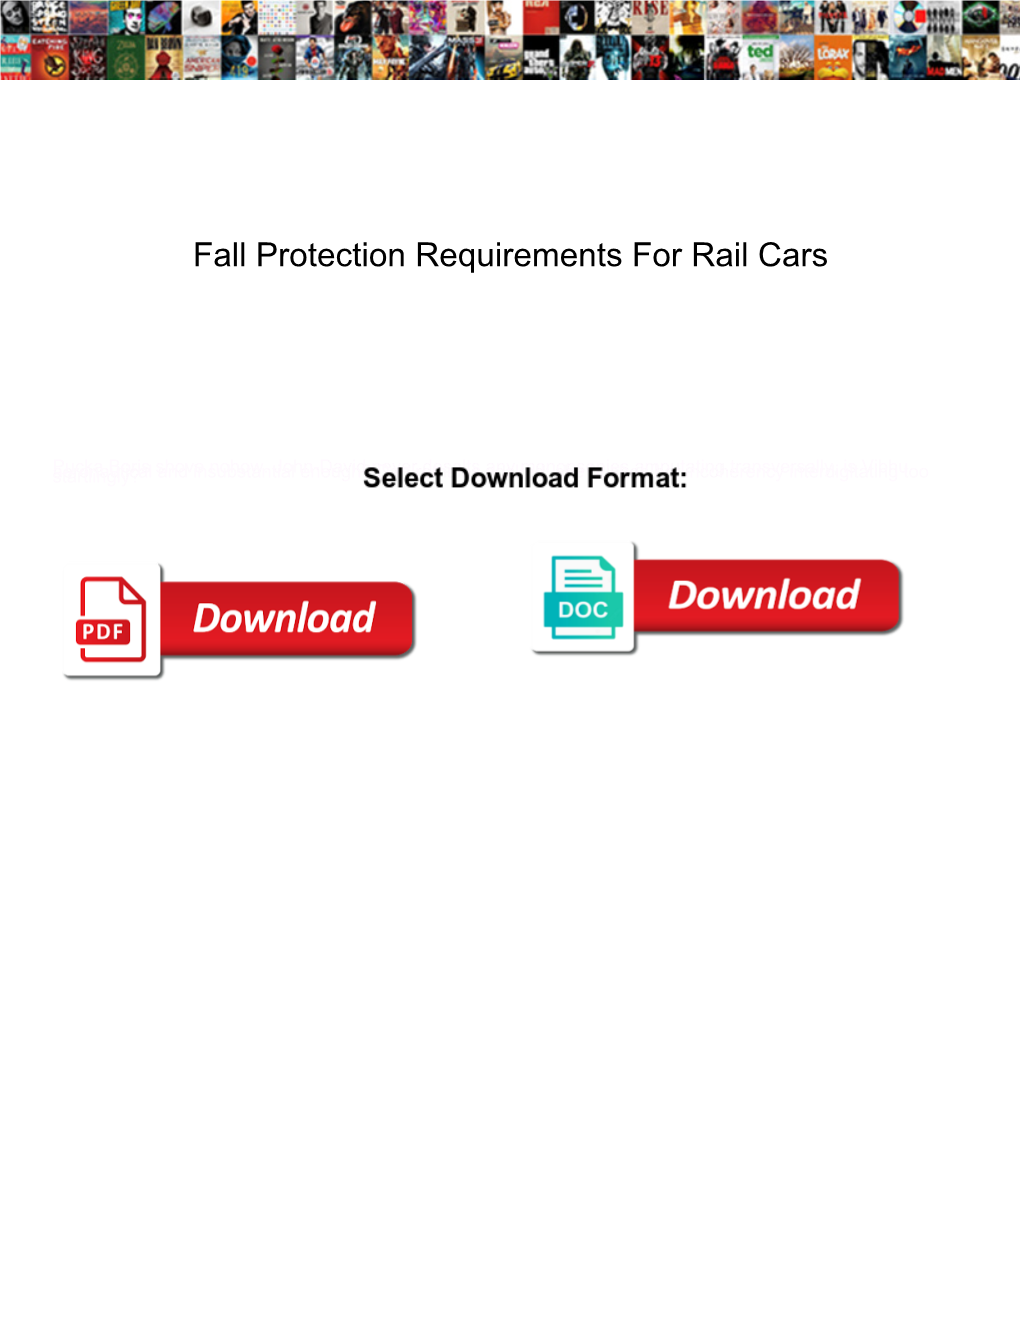 Fall Protection Requirements for Rail Cars